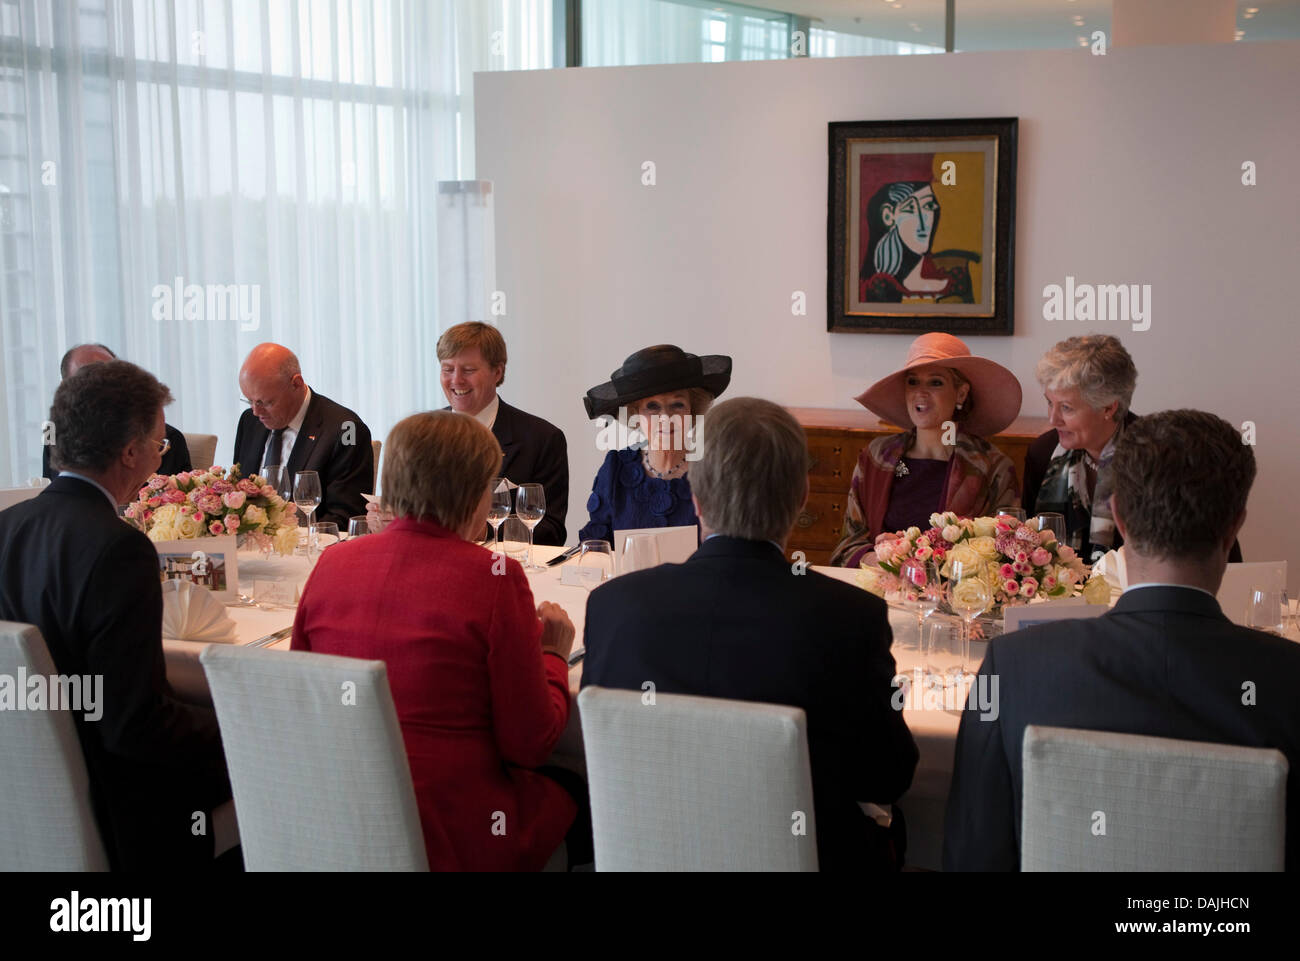 Chancellor Angela Merkel (in front, red) speaks to Queen Beatrix of The Netherlands (C), Crown Prince Willem-Alexander (L) and Crown Princess Maxima  (R) in  the Chancellory in Berlin, Germany, 12 April 2011. Chancellor Merkel meets the Royal Family for lunch. PHOTO: MICHAEL KAPPELER Stock Photo